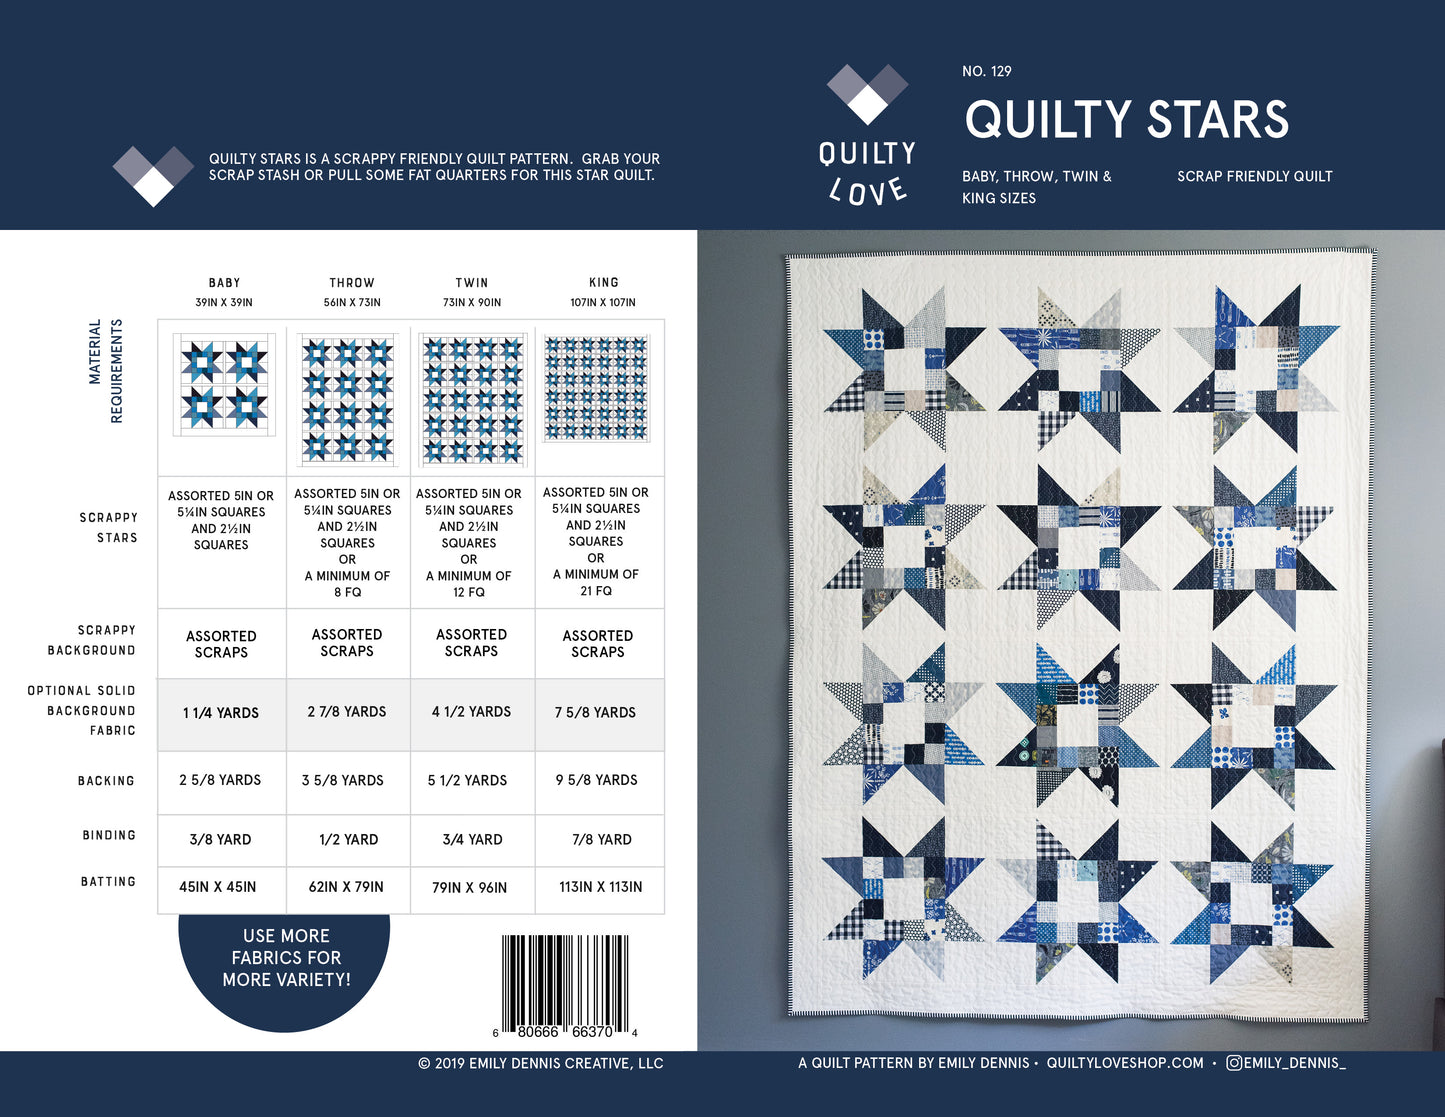 BESTSELLER STAR BUNDLE -Night Stars, Quilty Stars and Expanding Stars PDF quilt pattern bundle - Automatic Download